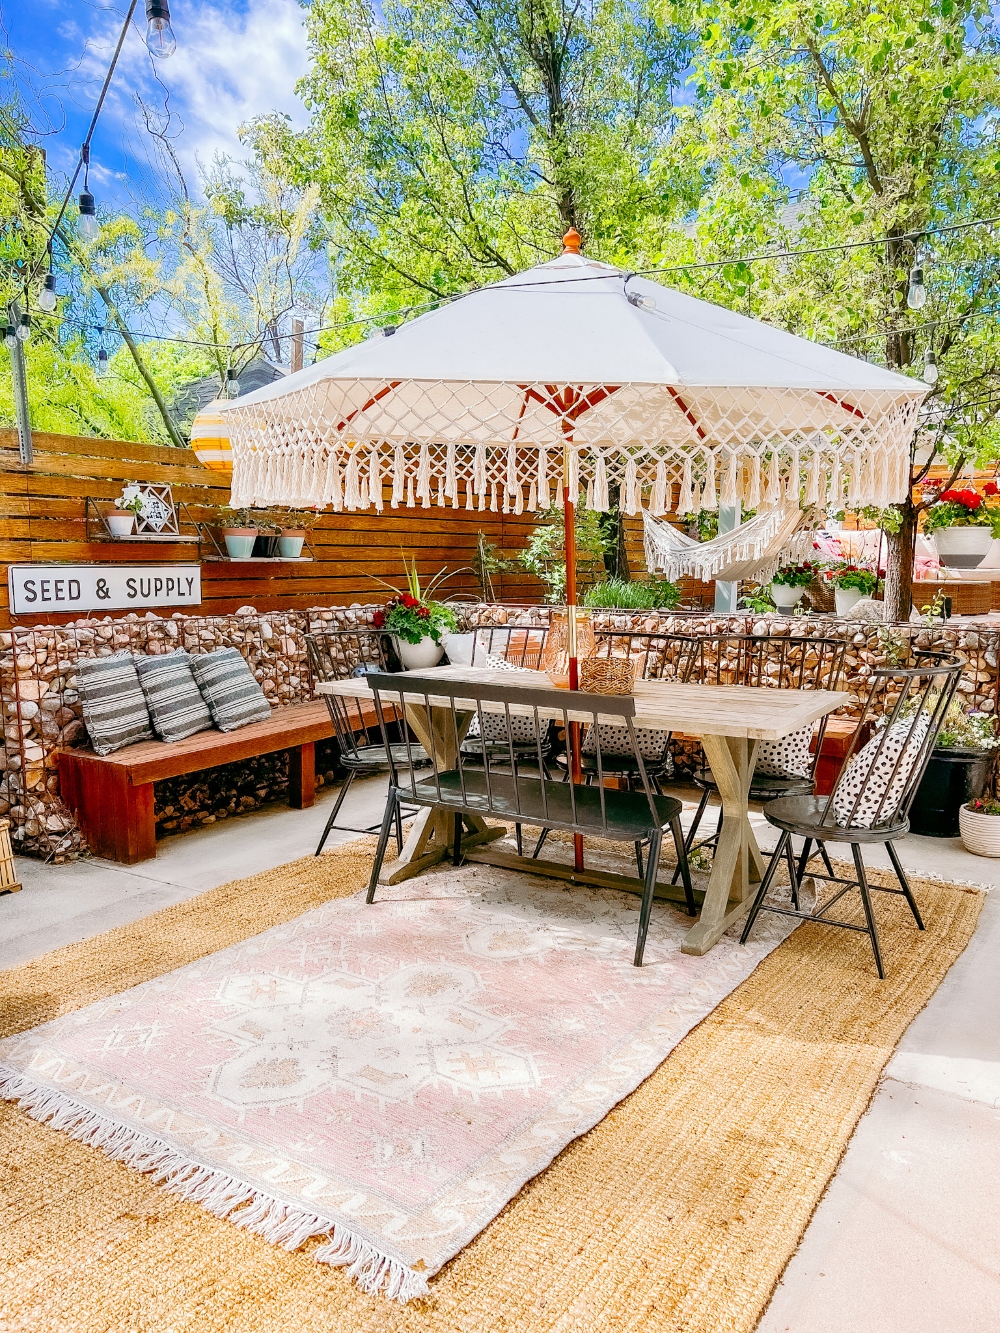 How to Make a Small Yard Seem Large. Ways to make every outdoor space have a purpose and work to make your small yard seem larger!